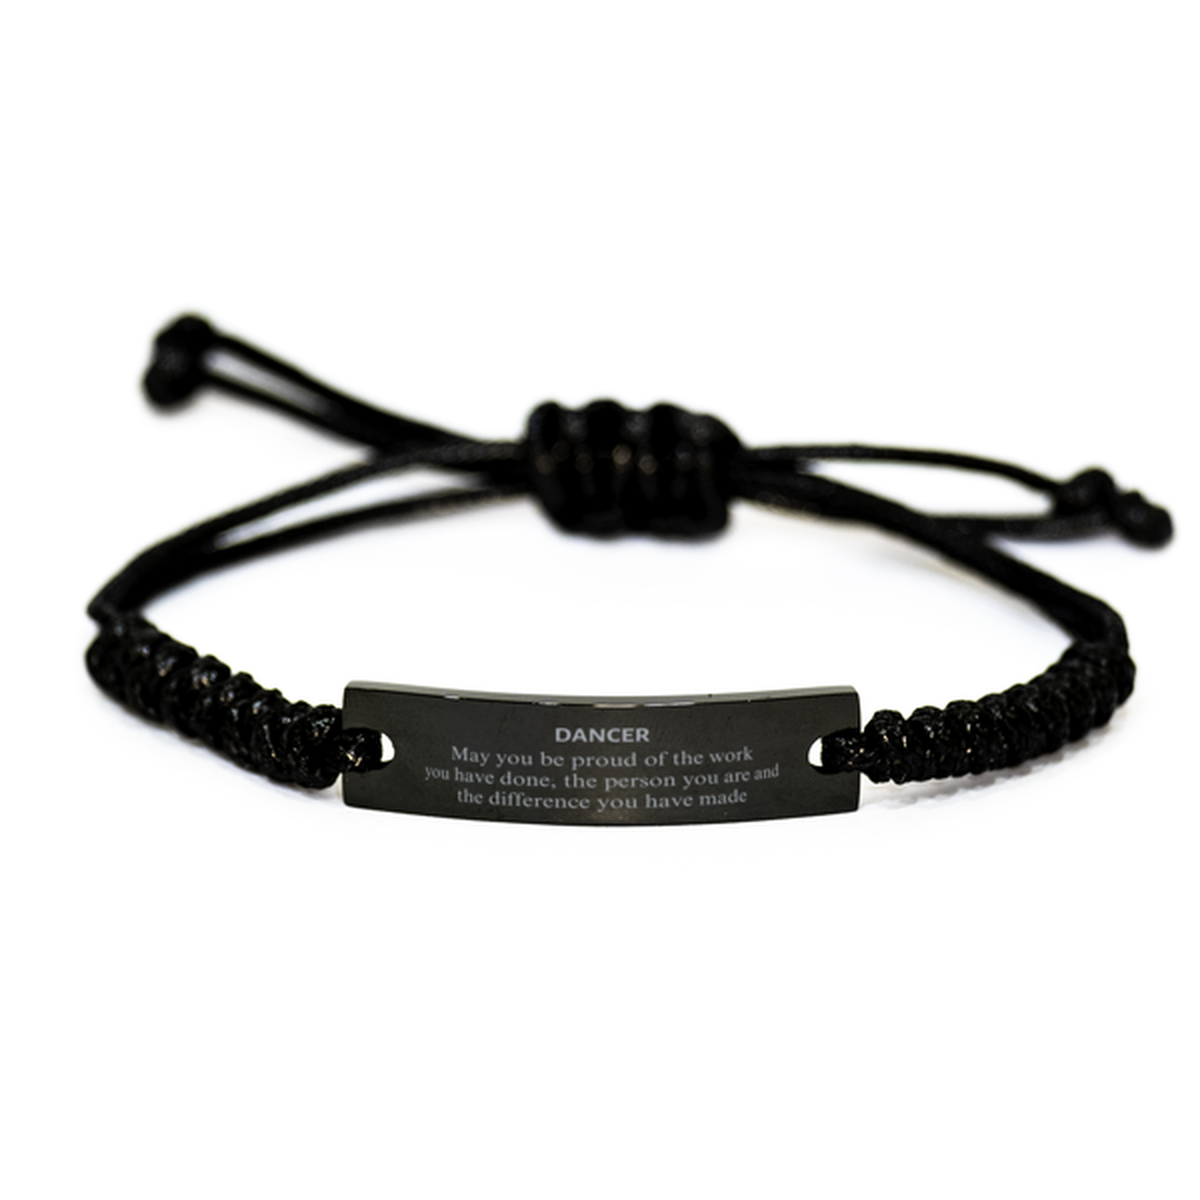 Dancer May you be proud of the work you have done, Retirement Dancer Black Rope Bracelet for Colleague Appreciation Gifts Amazing for Dancer